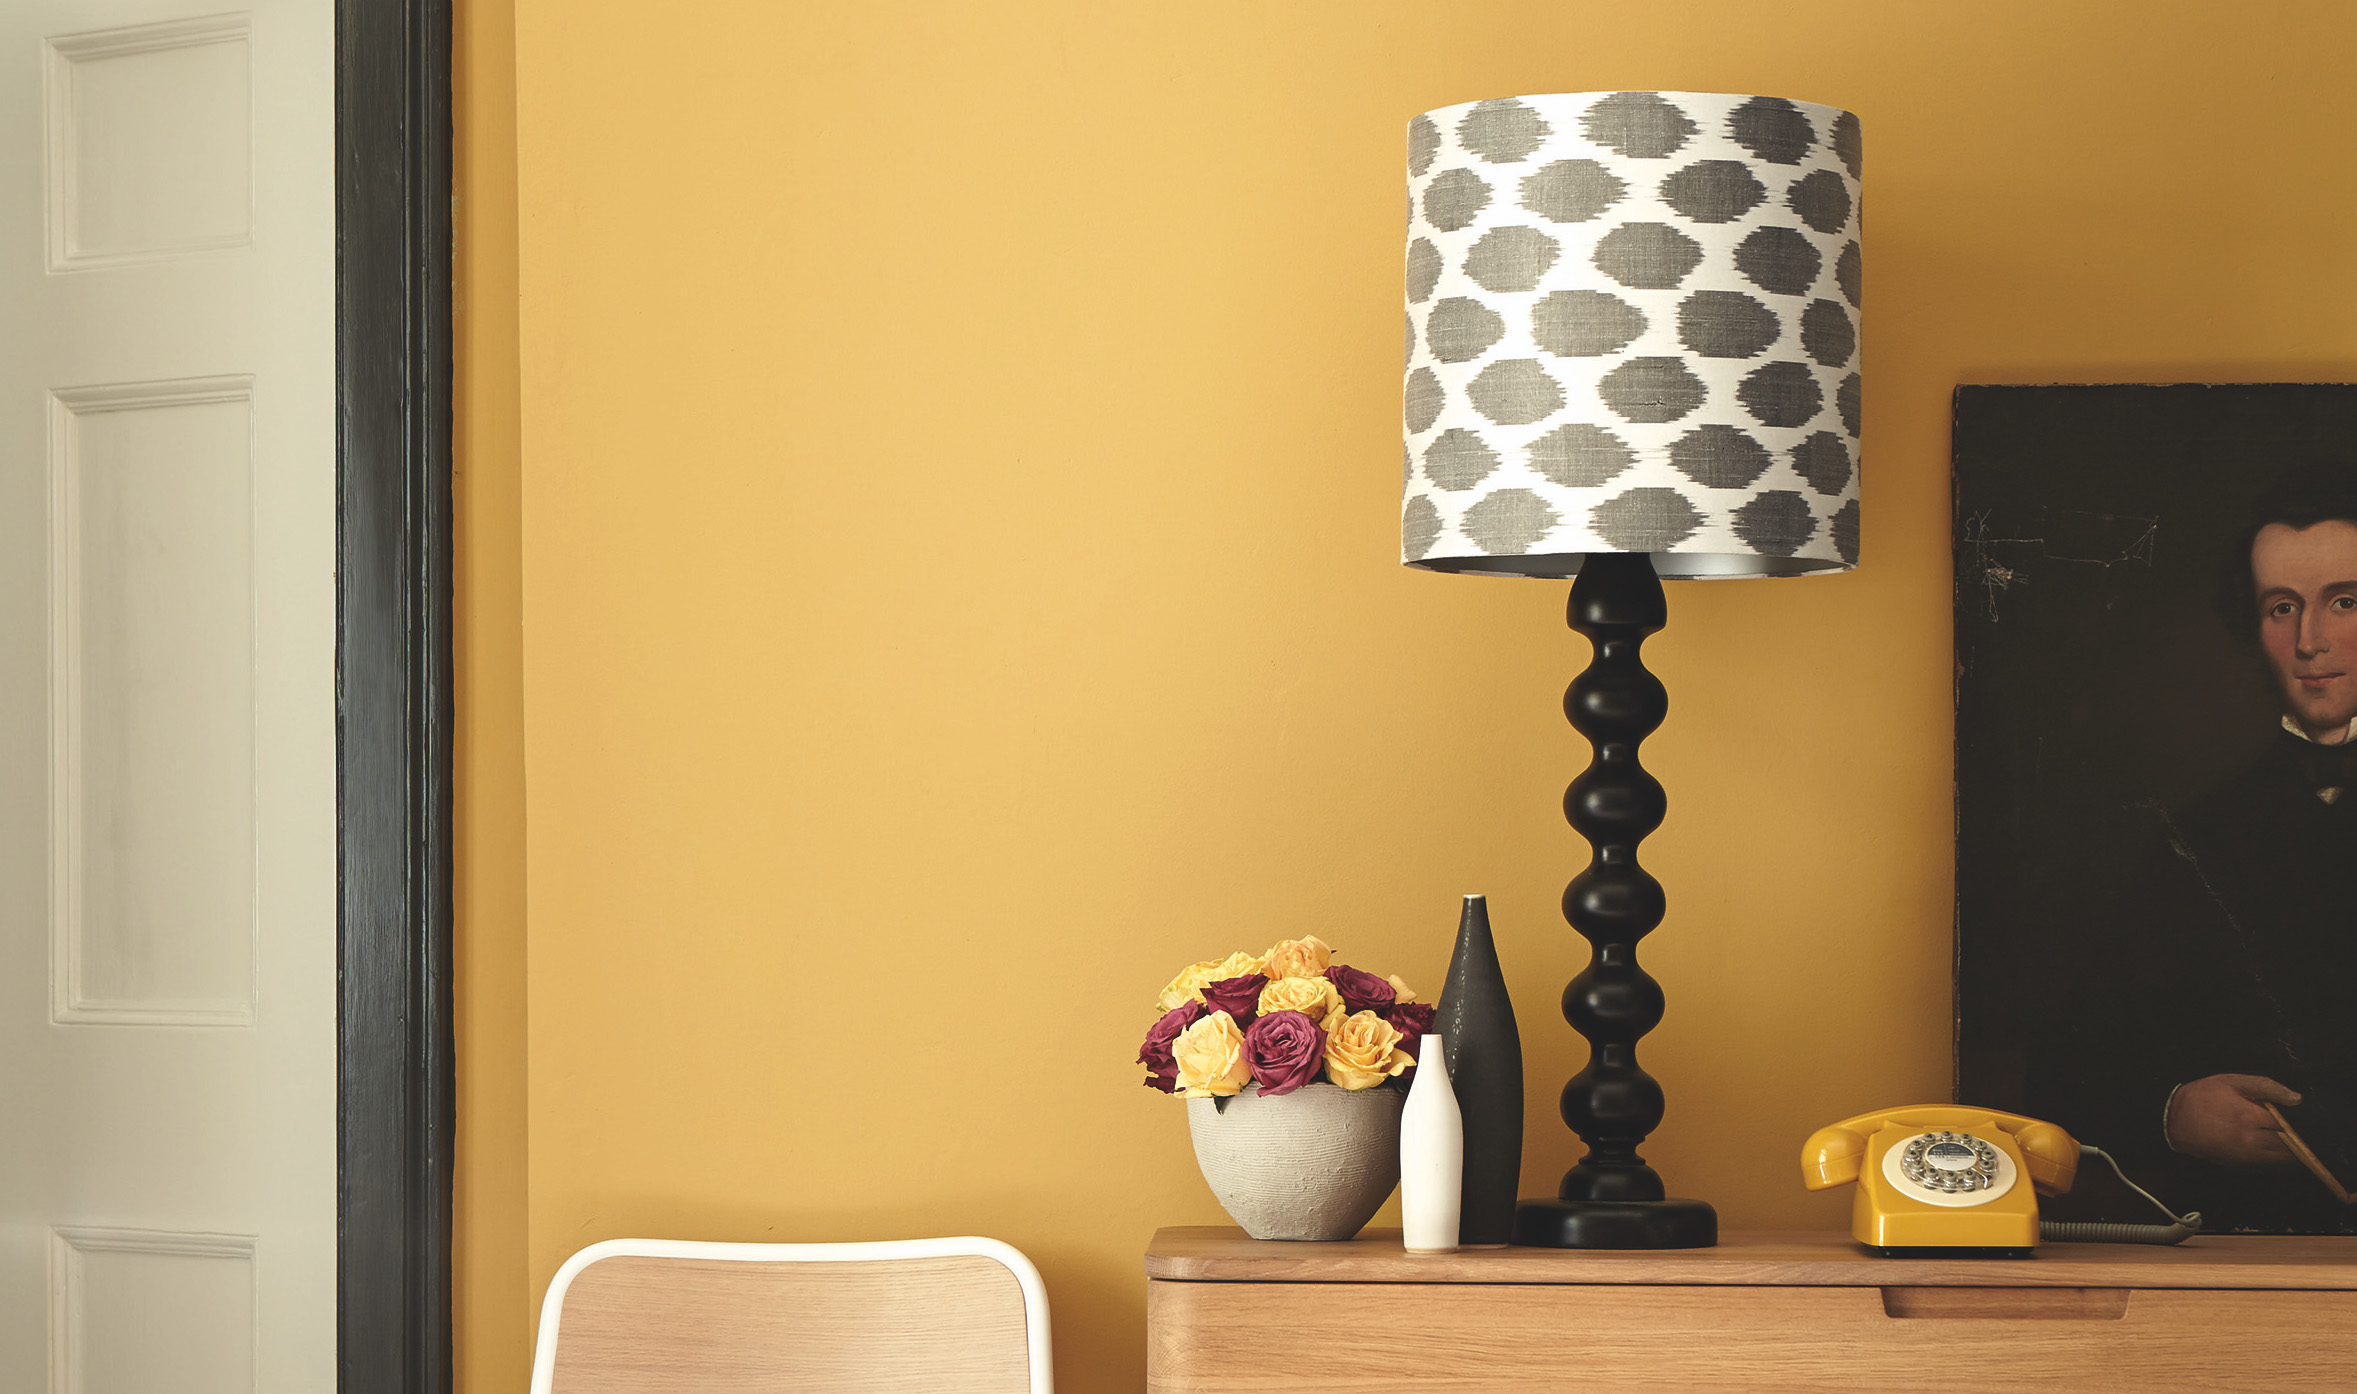 Mustard Yellow Can Make Your Home Decor